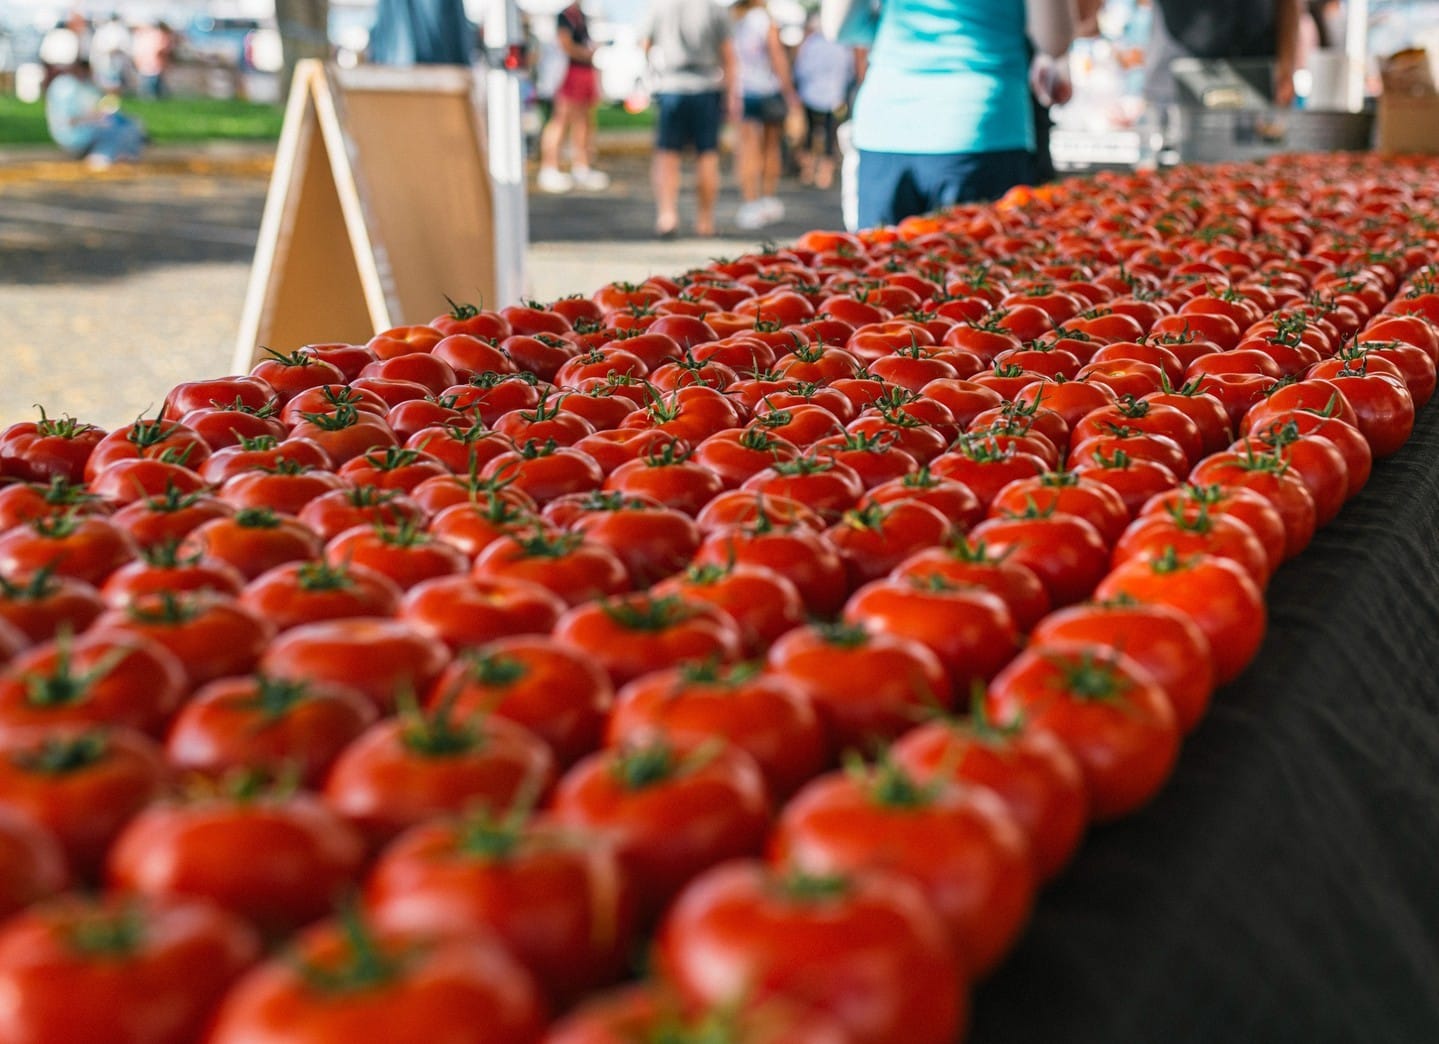 Celebrate National Farmer's Day by shopping local at the Kaka'ako Farmers Market this weekend! Every Saturday from 8am - 12pm, vendors from across O‘ahu are sharing locally-grown fruits, vegetables and flowers. Learn more at the link in our bio!